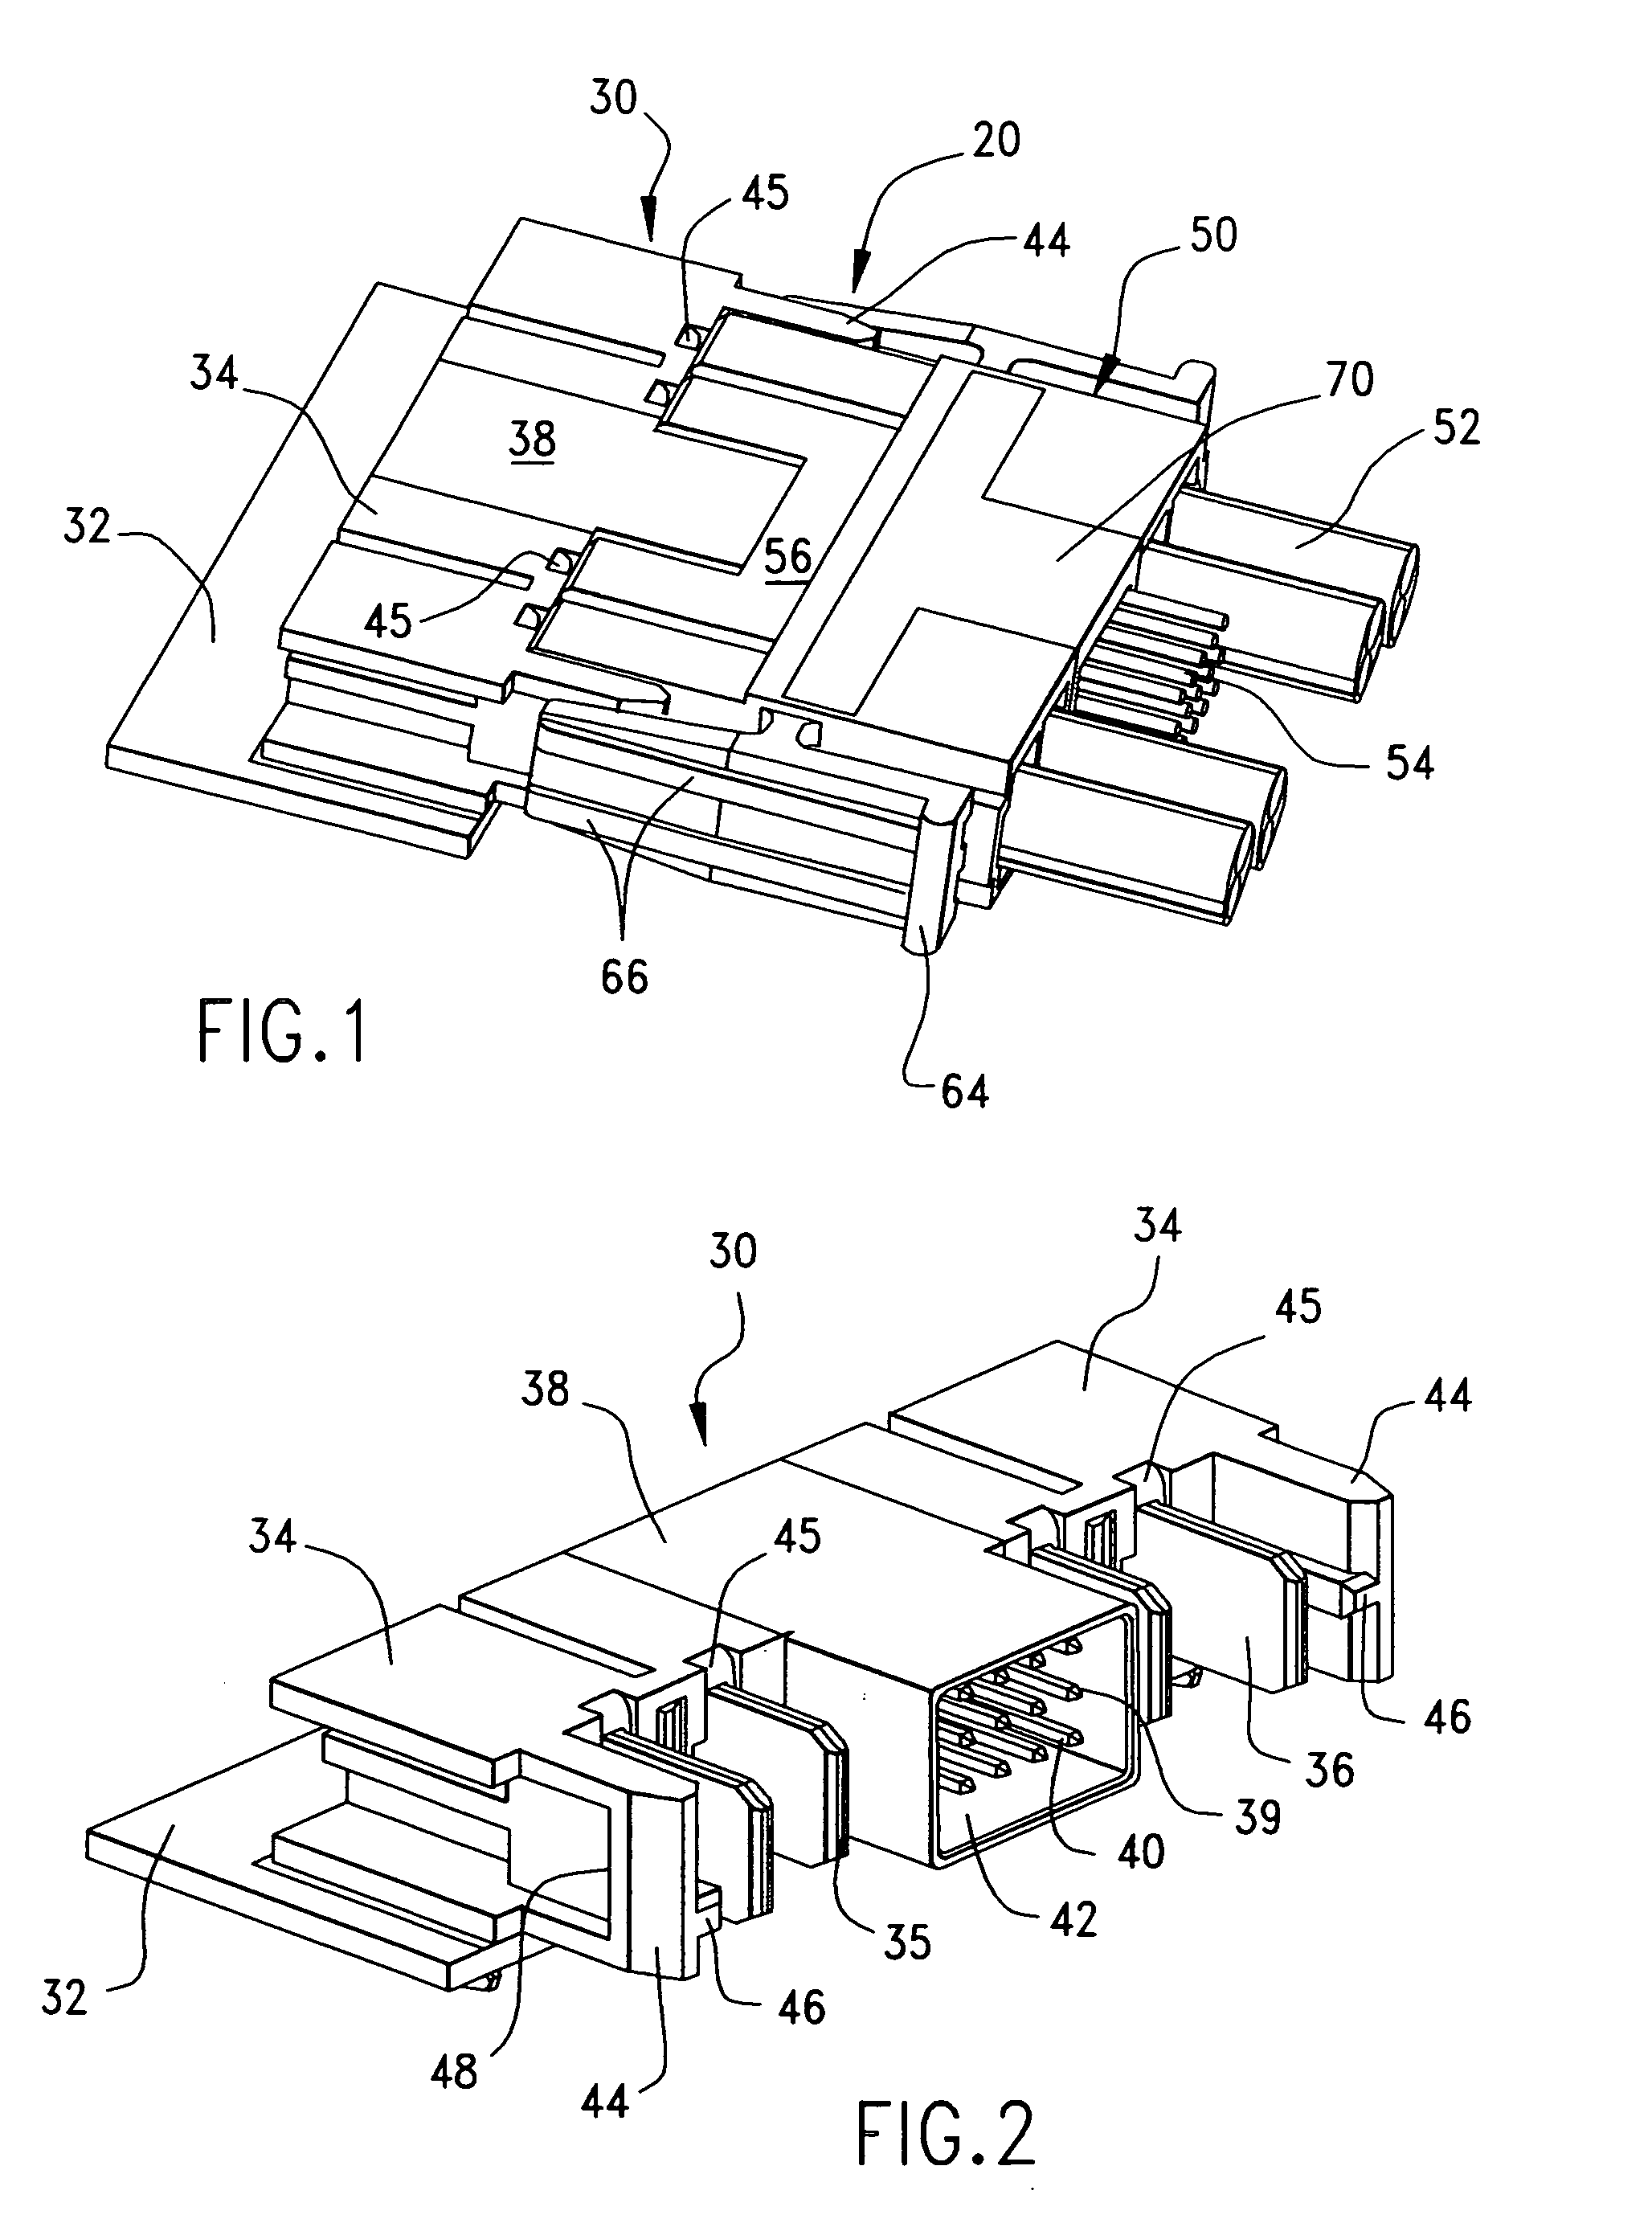 Power connector with integrated signal connector